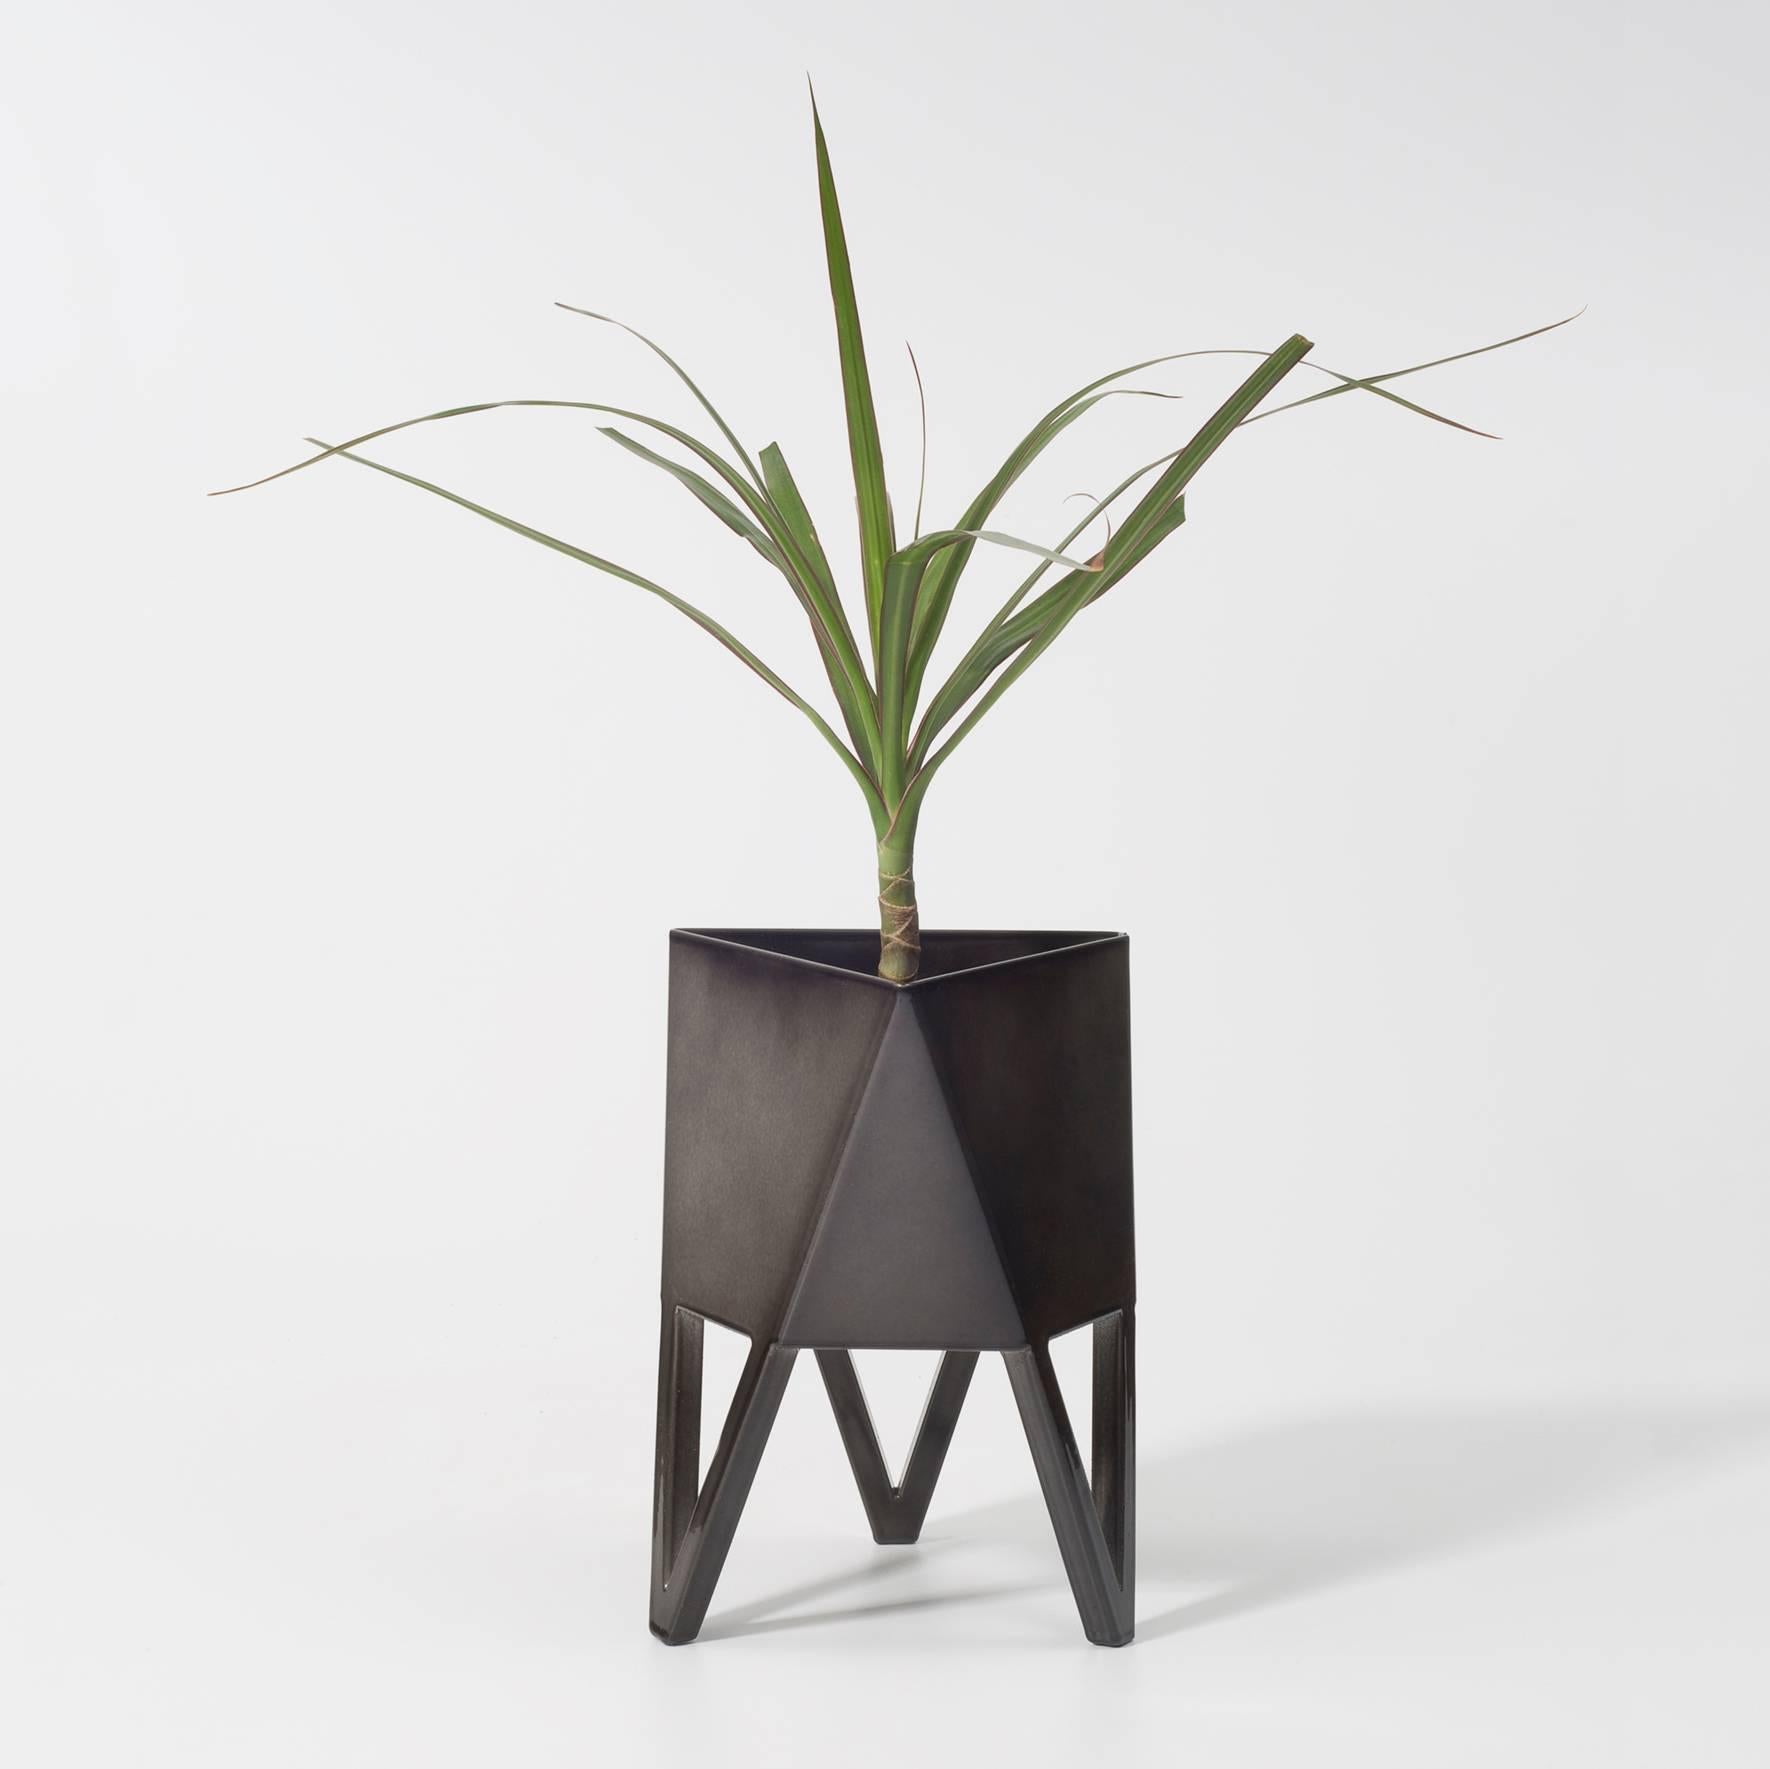 Deca Planter in Pastel Green Steel, Large, by Force/Collide 4